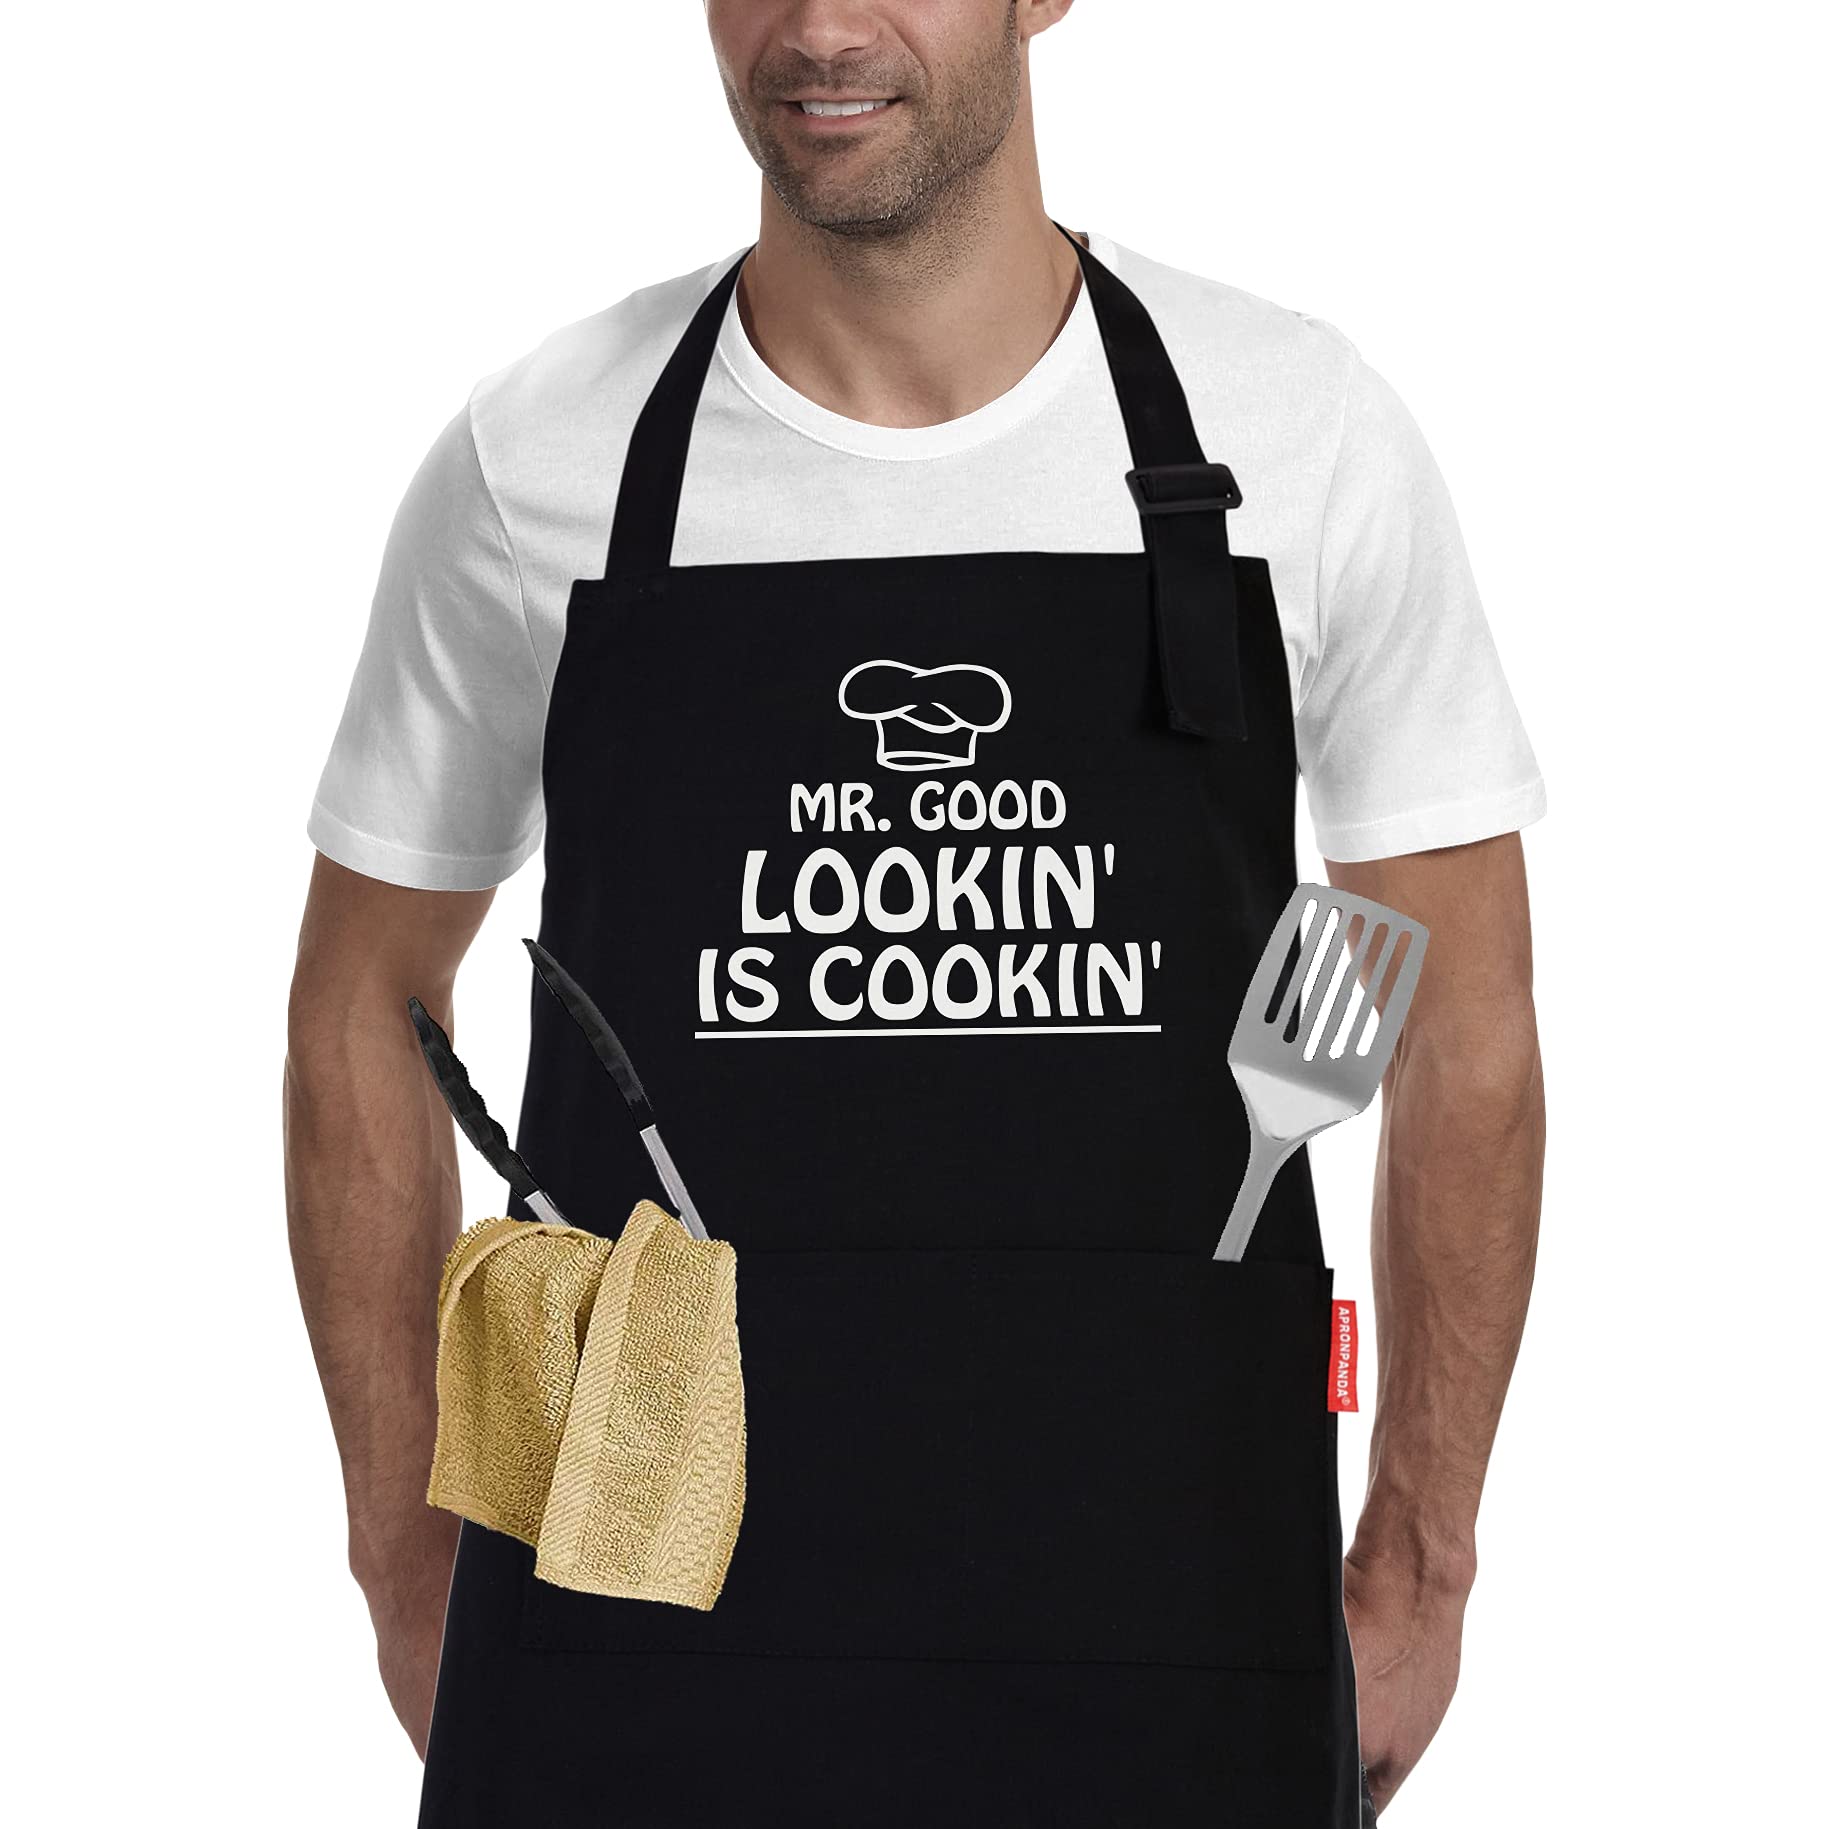 Cooking Aprons for Men with Pockets, Adjustable Apron for Home Kitchen, BBQ Grilling, Cooking Gifts for Men Chef, Gifts for Men, Dad, Husband, Grandad Birthday Gifts